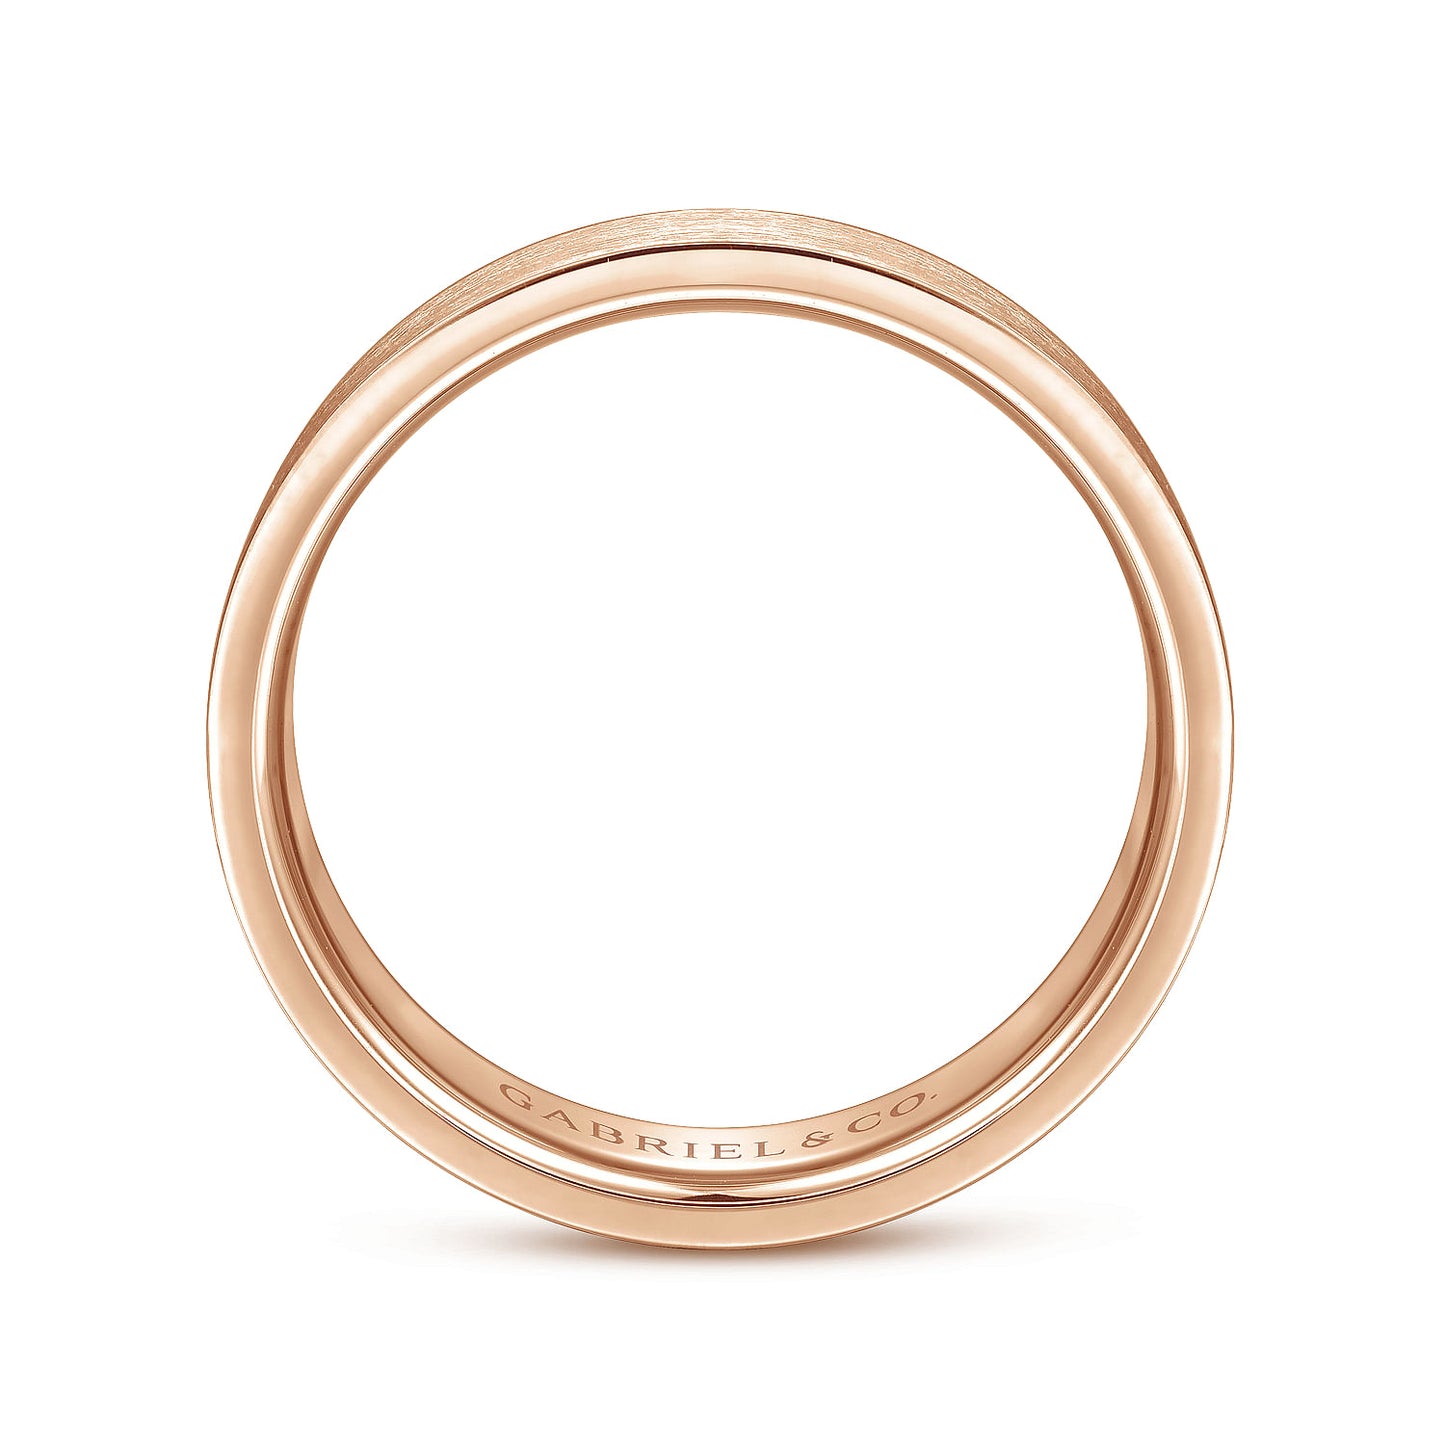 Gabriel & Co Rose Gold Wedding Band With A Brushed Finish - Gold Wedding Bands - Men's